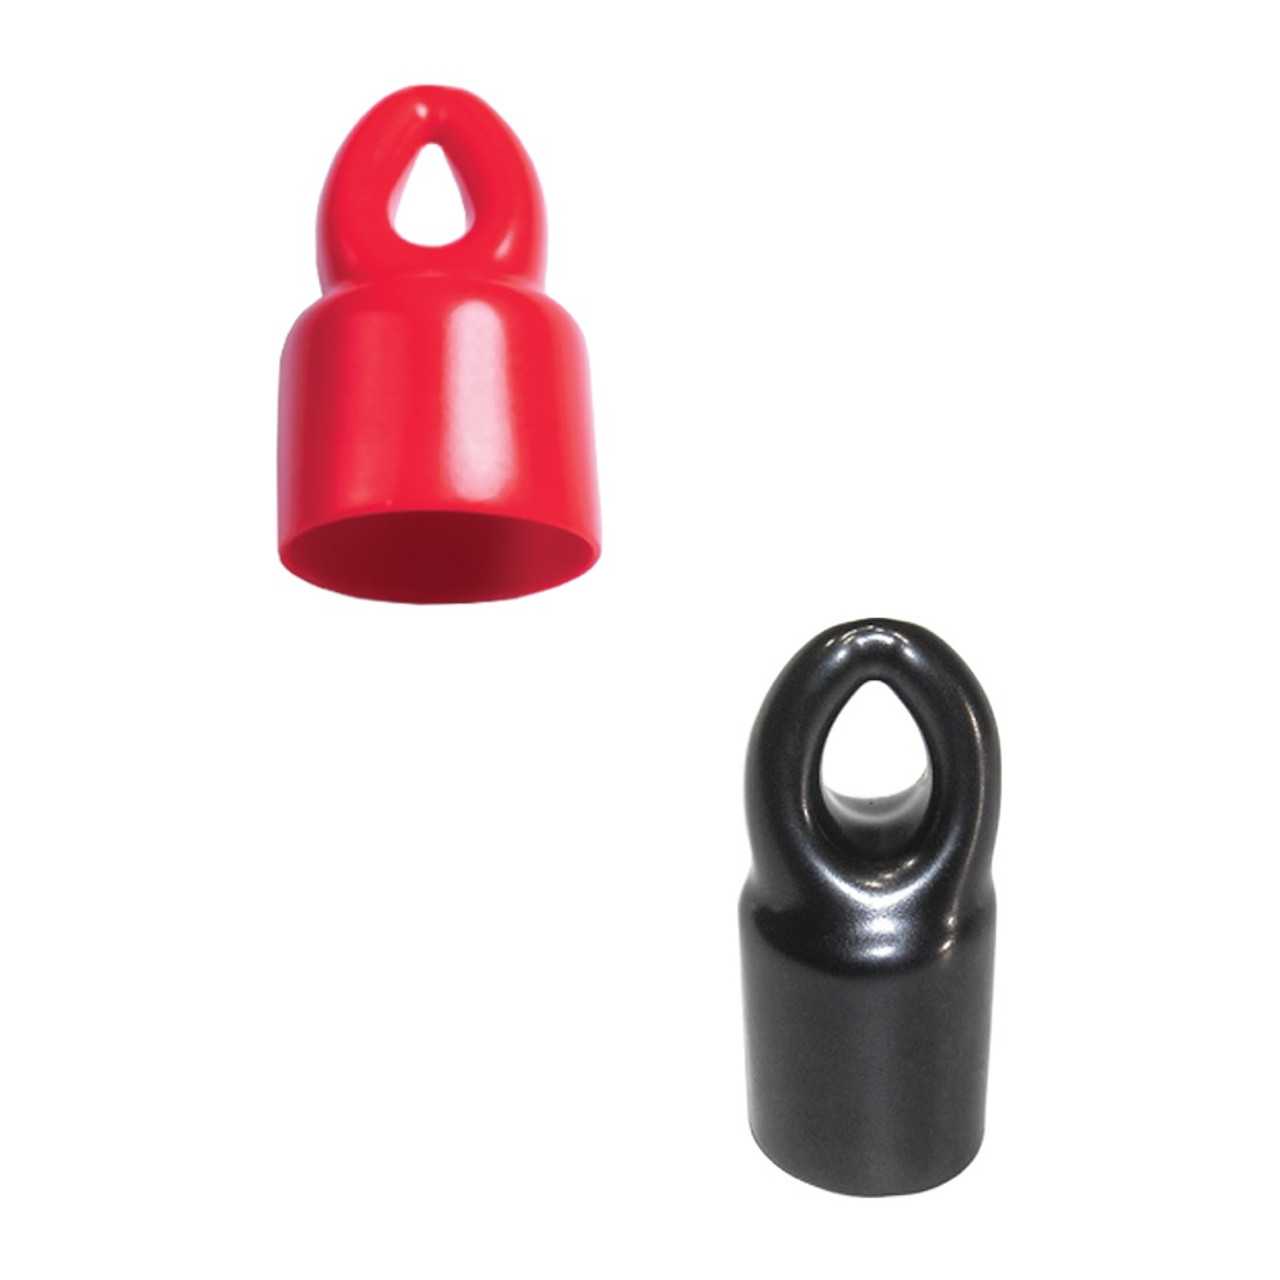 1" x 1" Hanger Cap - 250 in Red or Black and Various Sizes